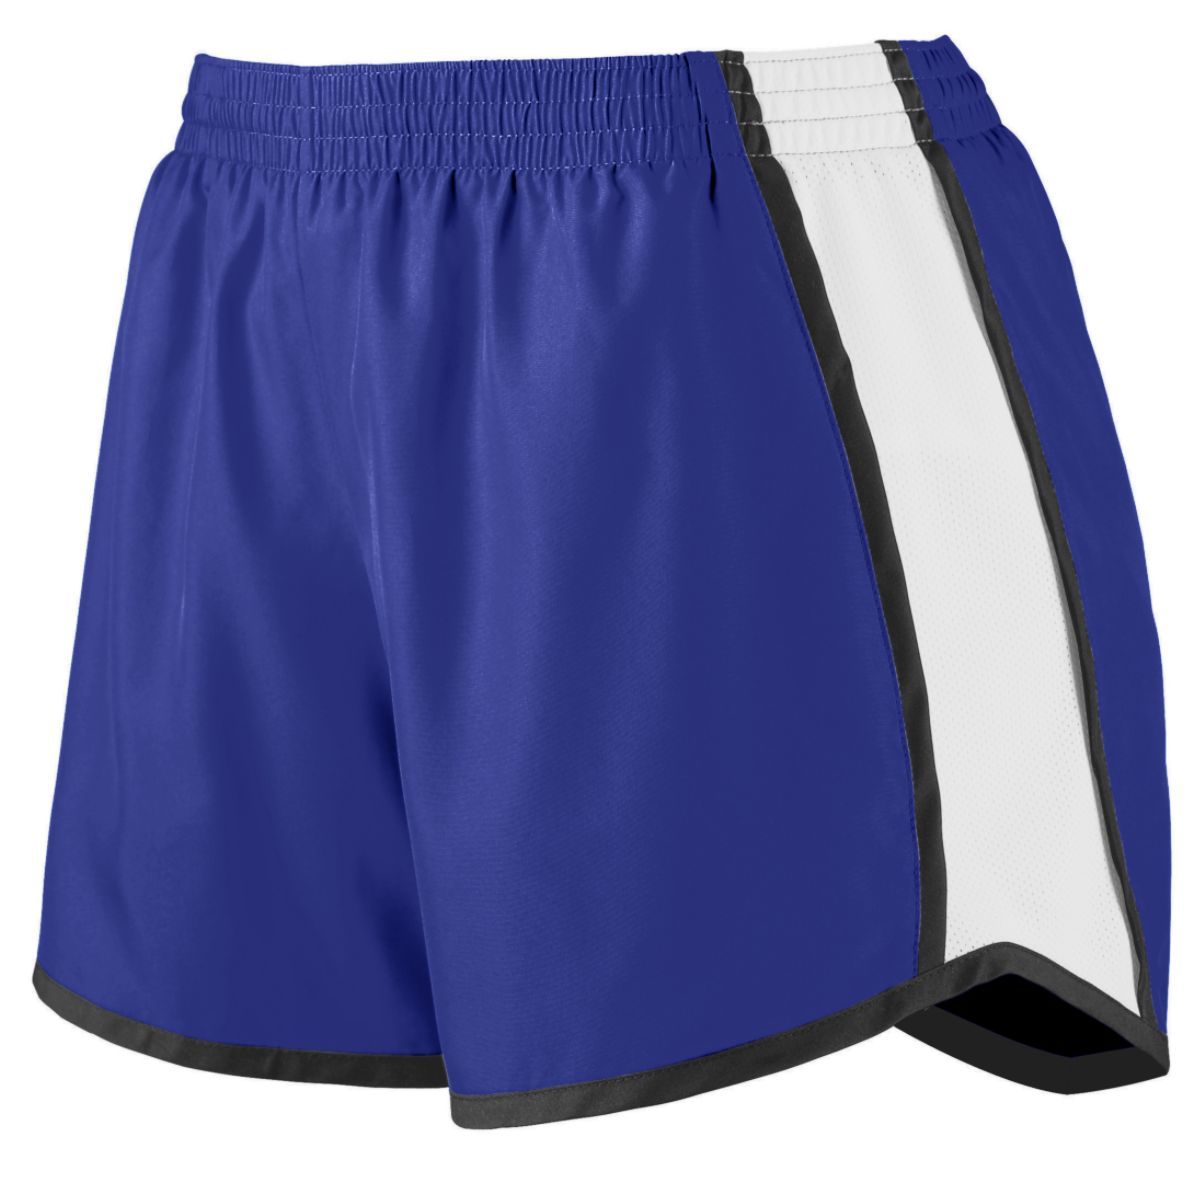 Augusta Sportswear Ladies Pulse Shorts in Purple/White/Black  -Part of the Ladies, Ladies-Shorts, Augusta-Products, Volleyball product lines at KanaleyCreations.com